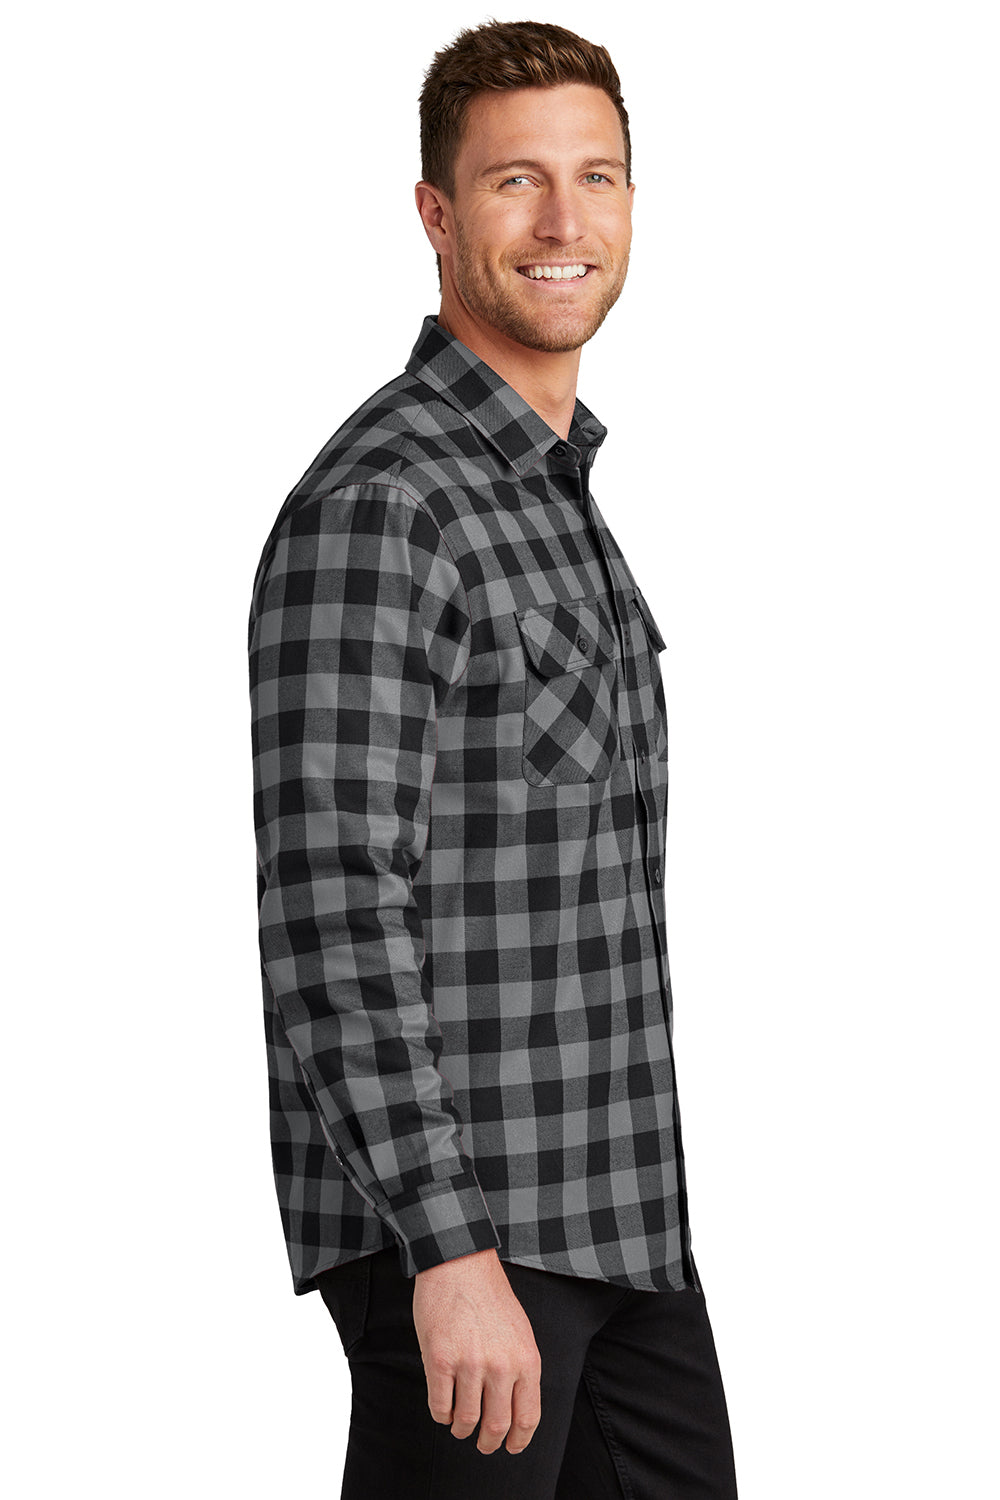 Port Authority W668 Mens Flannel Long Sleeve Button Down Shirt w/ Double Pockets Grey/Black Buffalo SIde